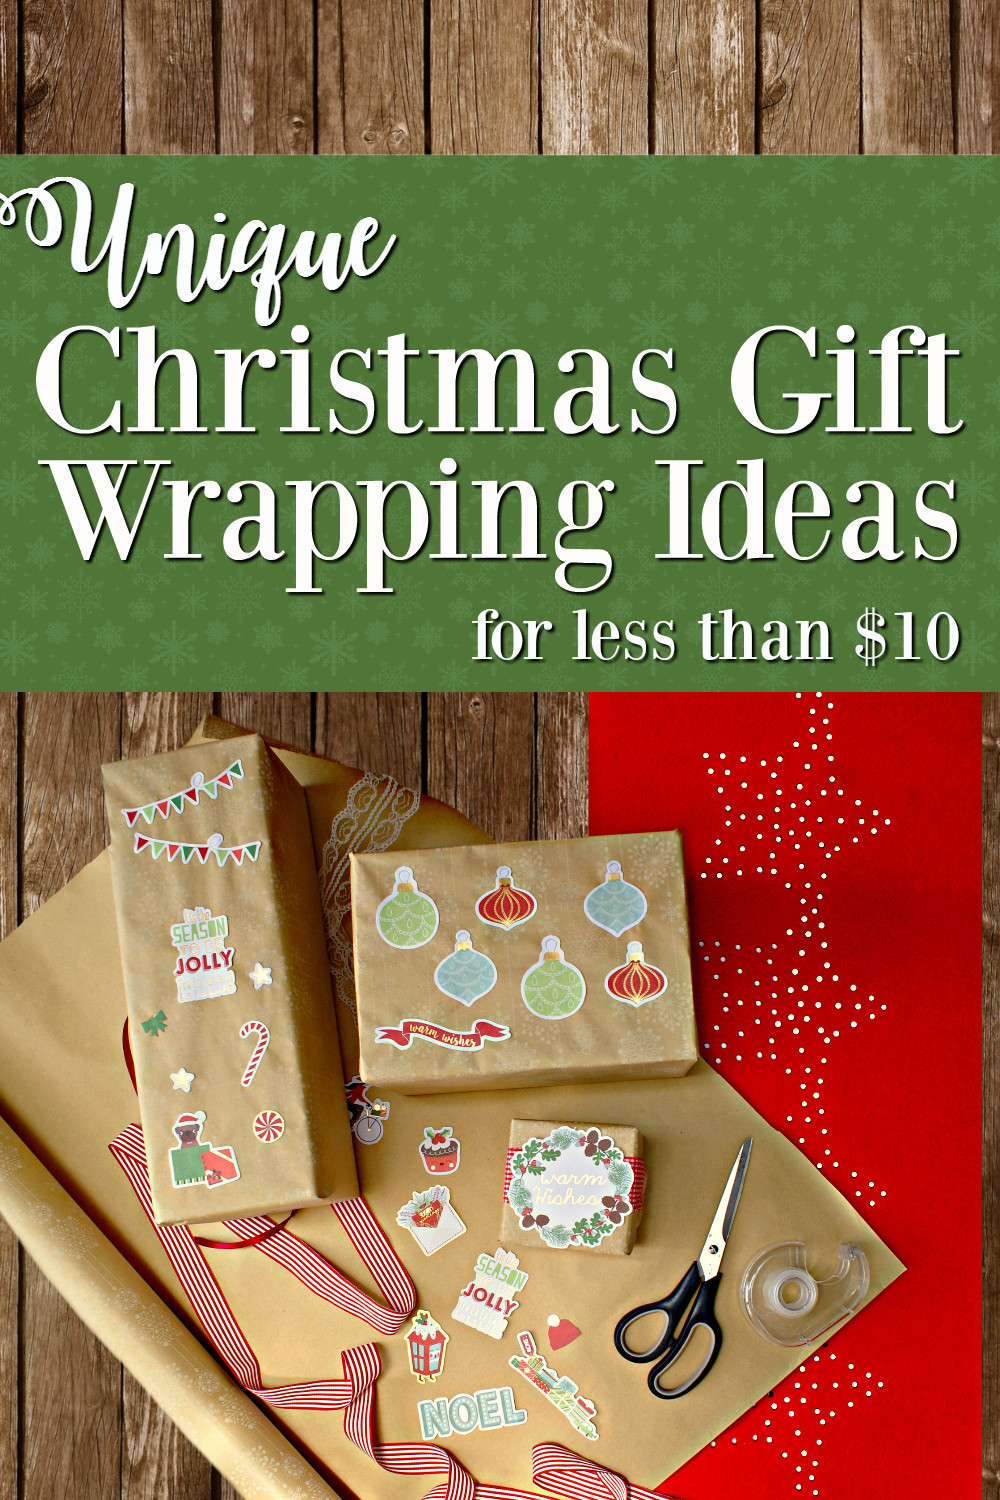 Cool Holiday Gift Ideas
 Southern In Law Unique Gift Wrapping Ideas for Christmas